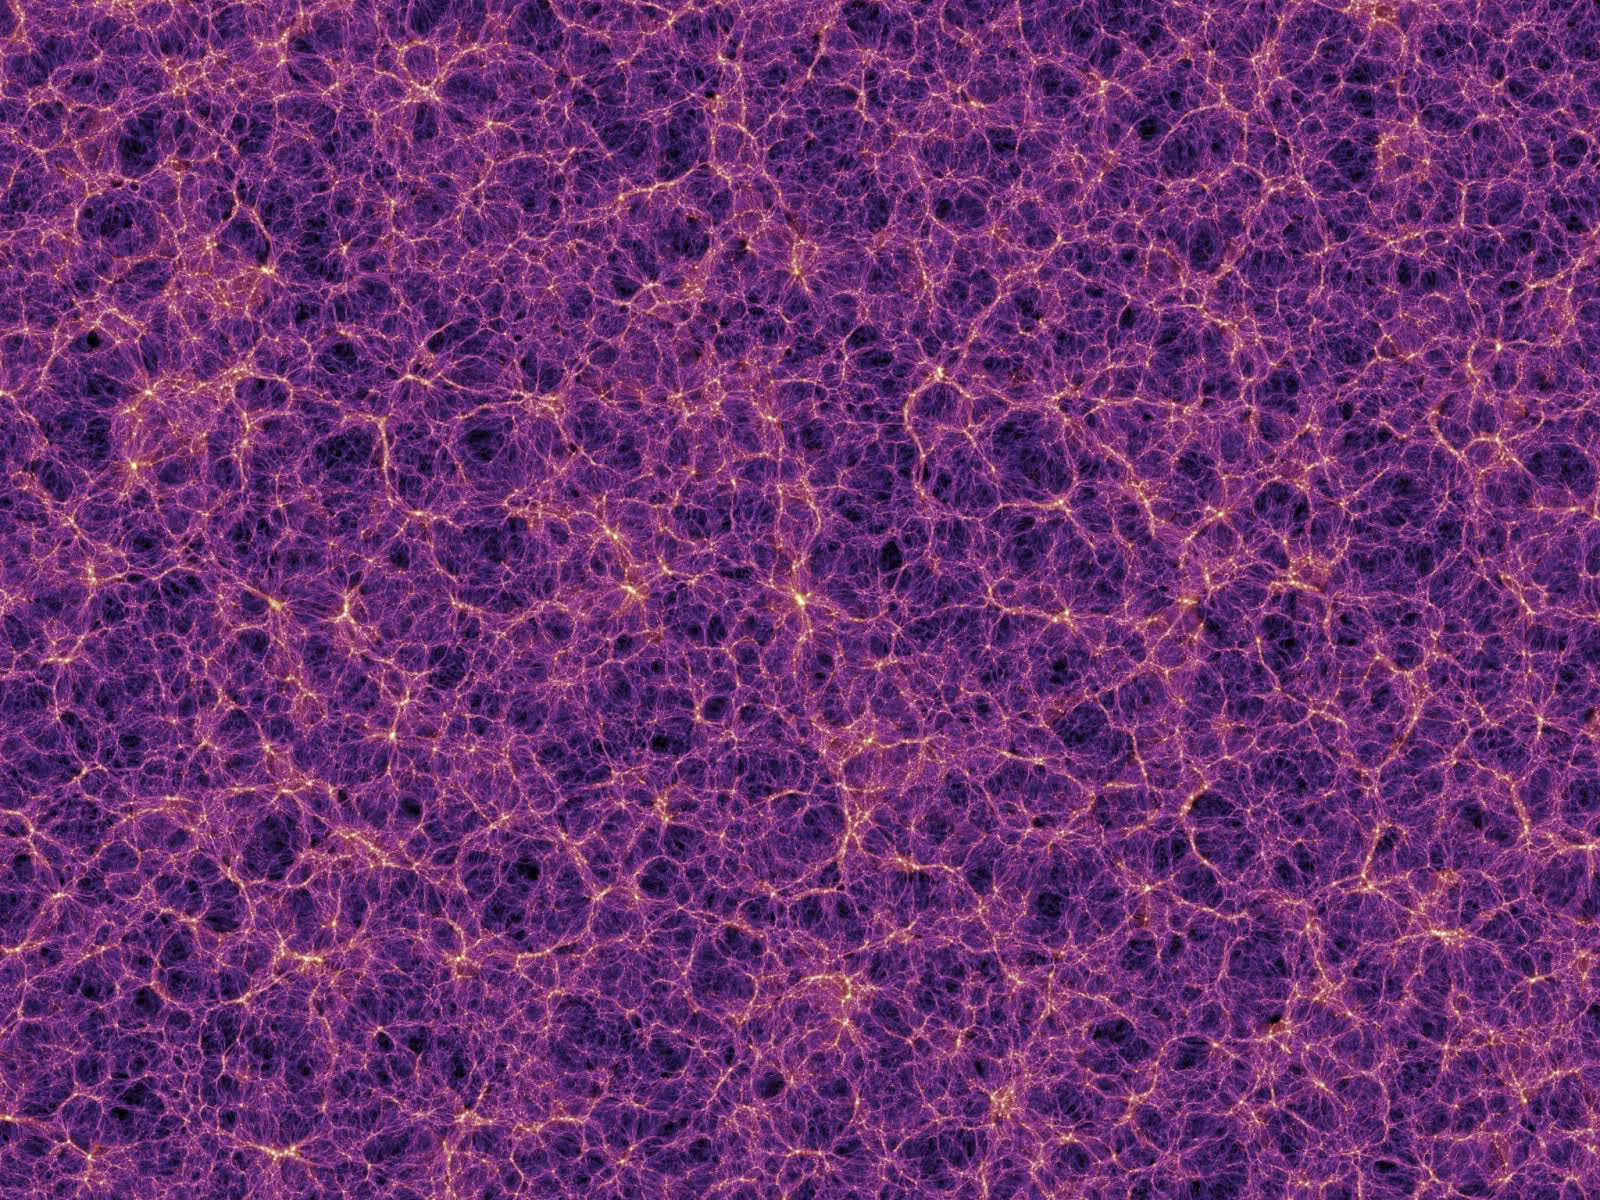 Our Universe, the "cosmic web". Each yellow dot is a galaxy. The purple streams represent dark matter. This image represents 0.000001 percent of the known universe